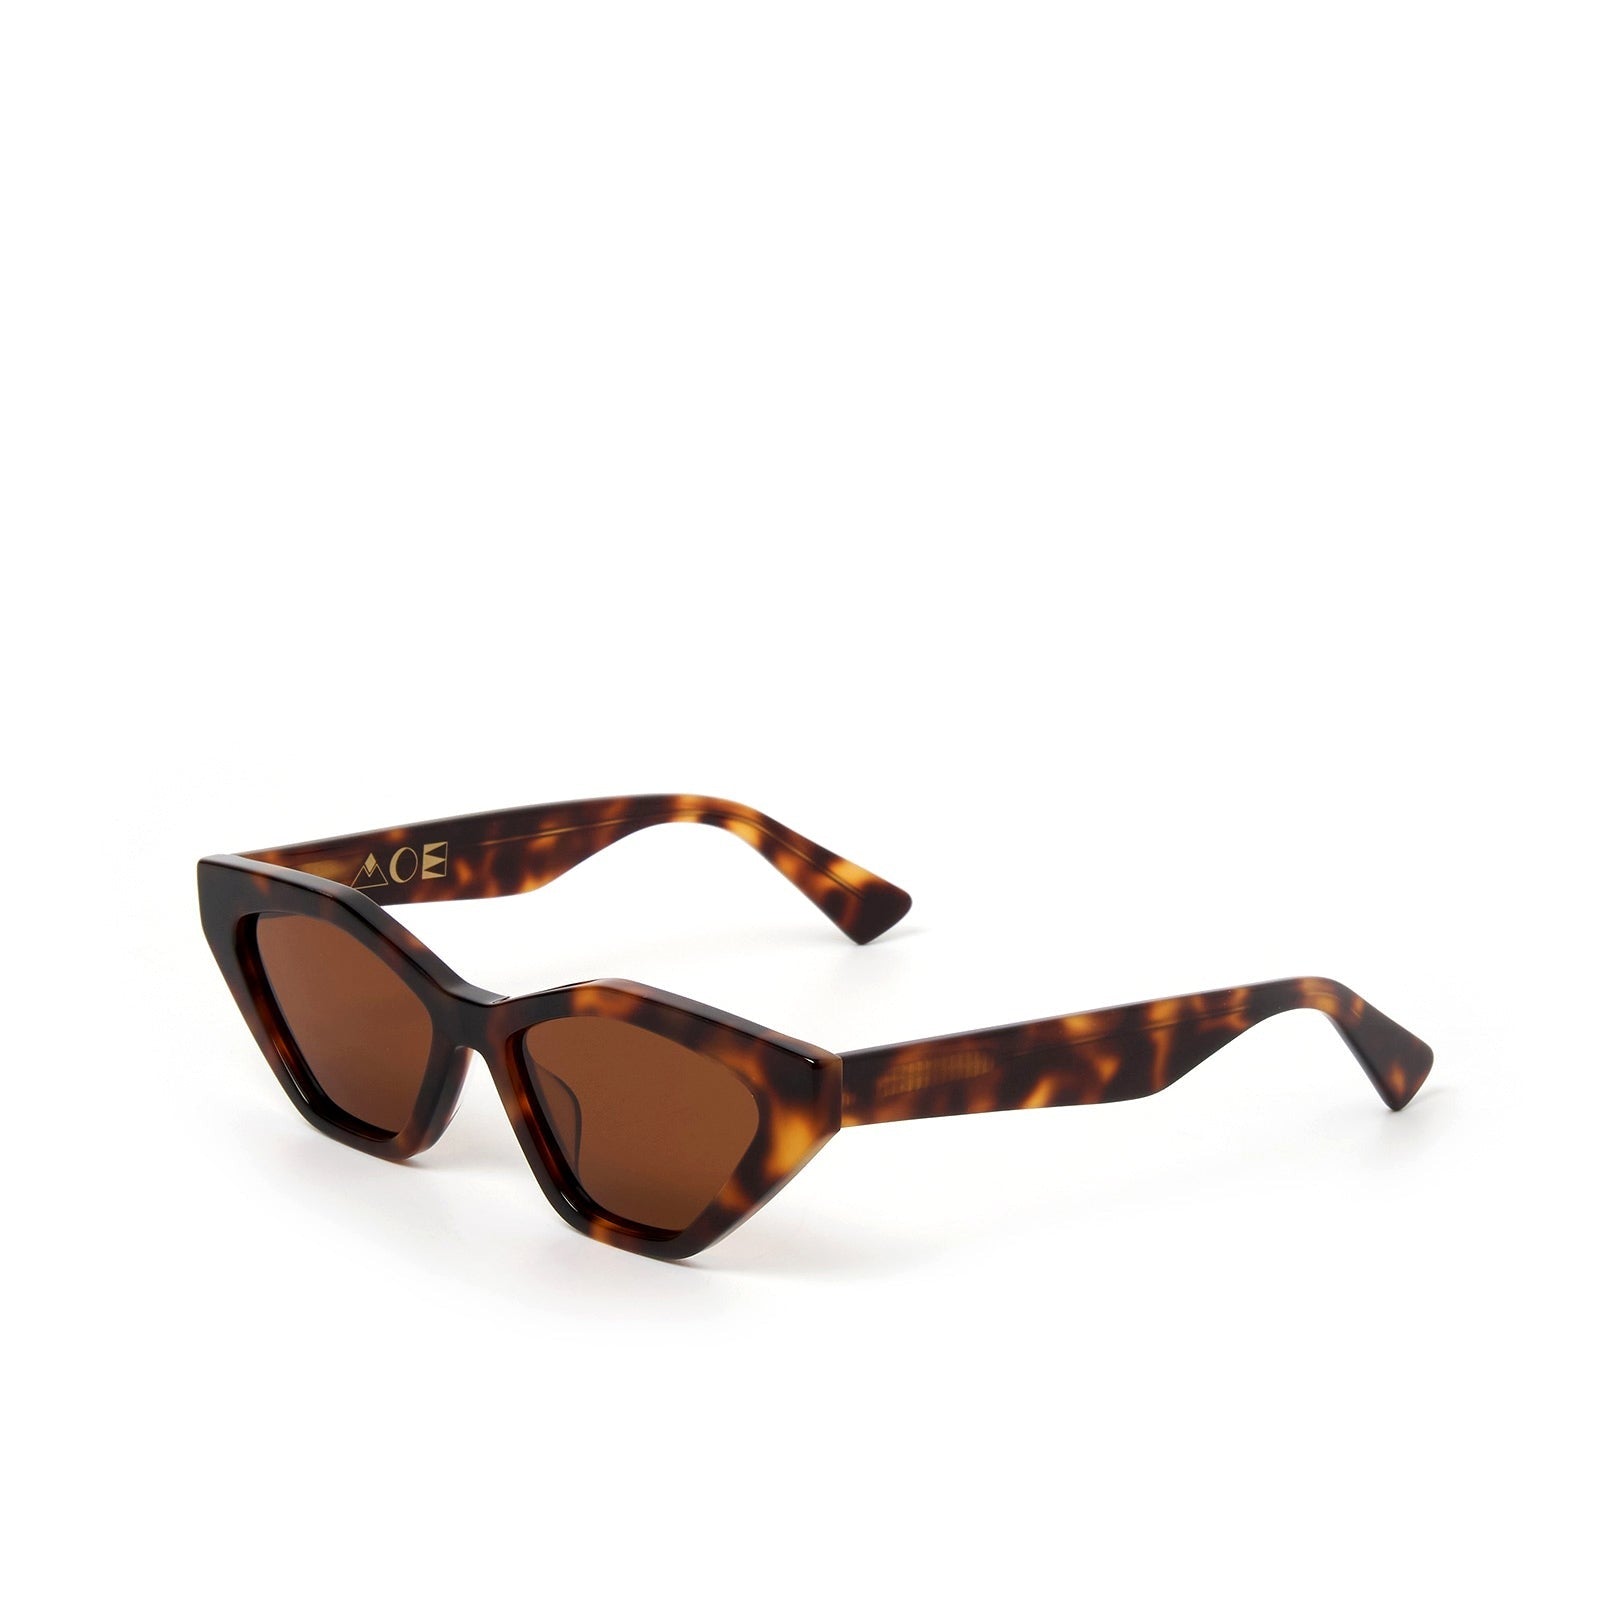 Arms Of Eve | Jagger Sunglasses - Tortoise